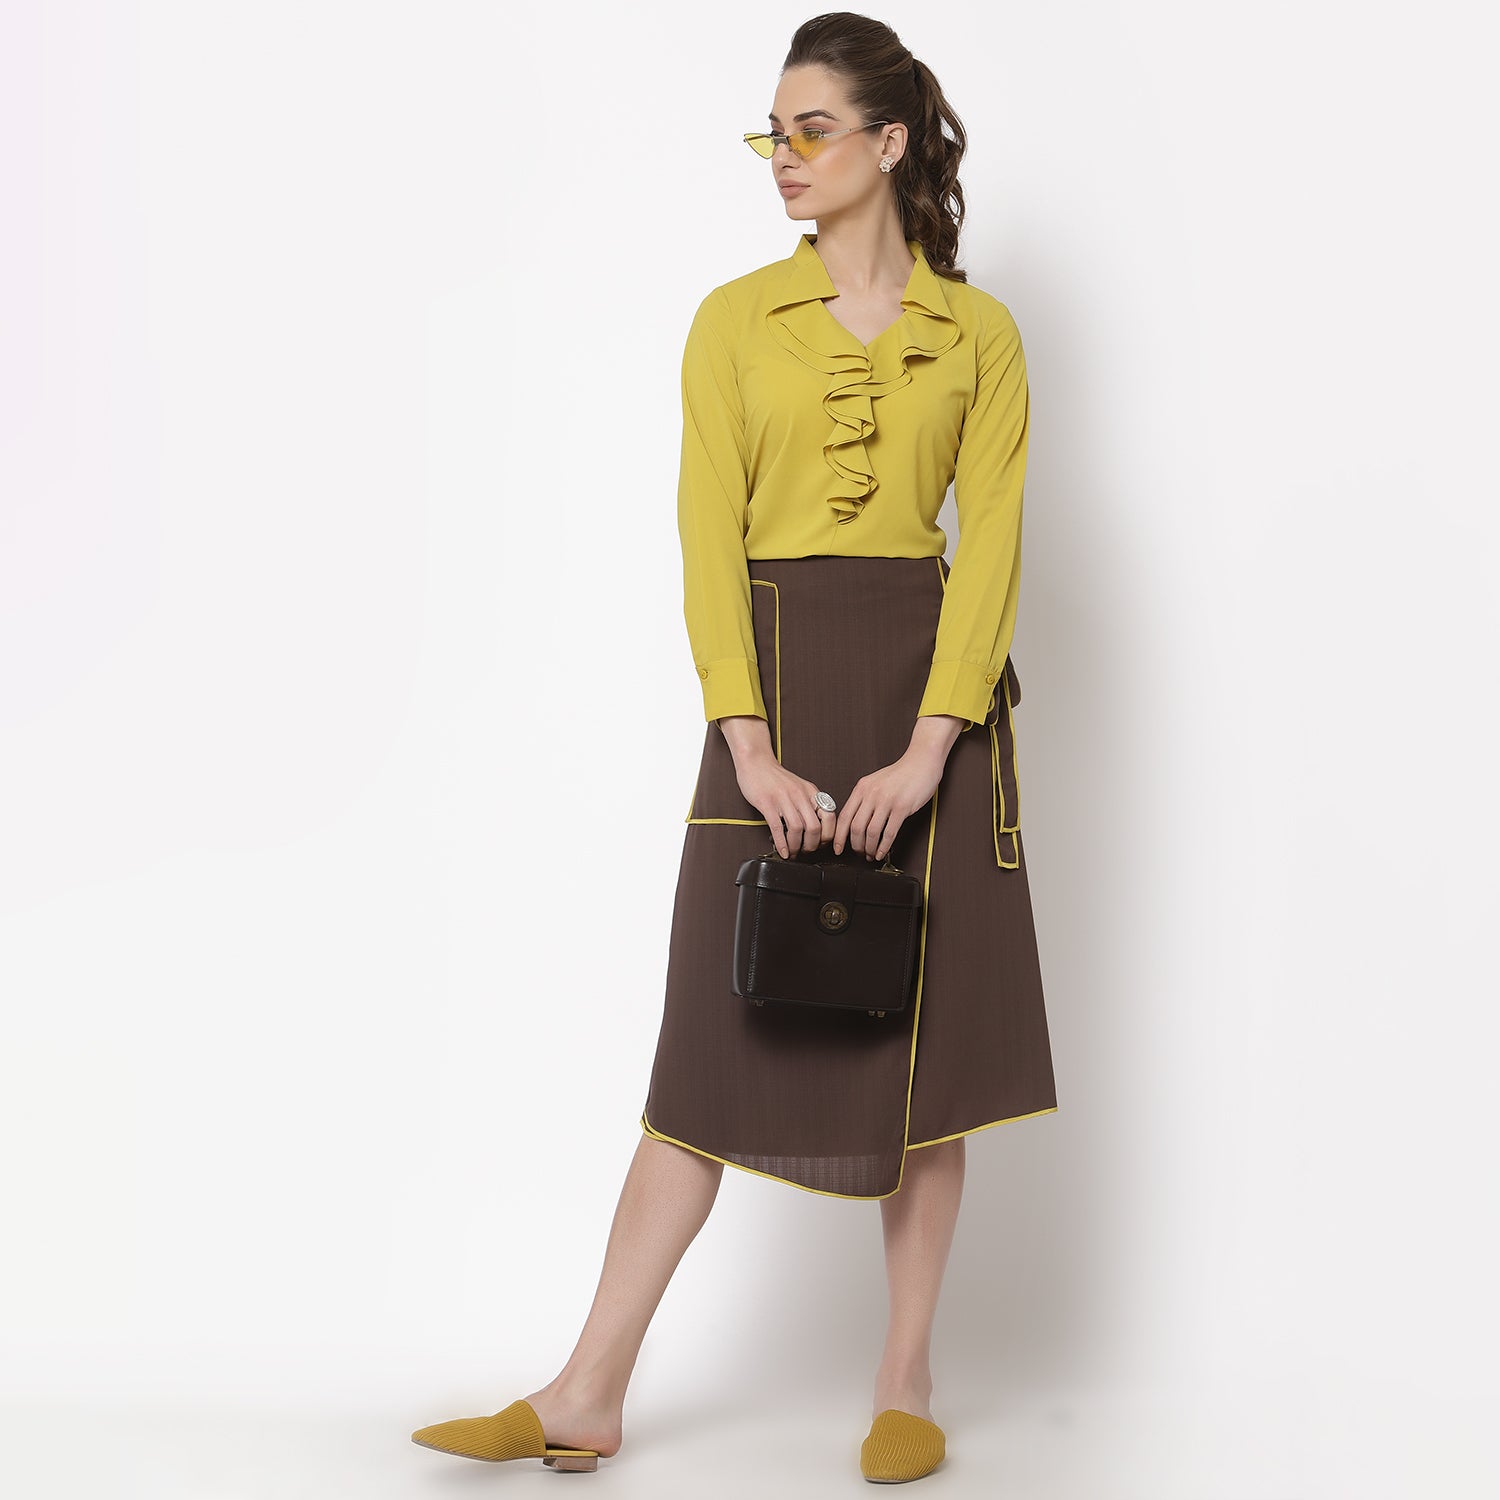 Brown Asymmetrical Skirt With Yellow Piping